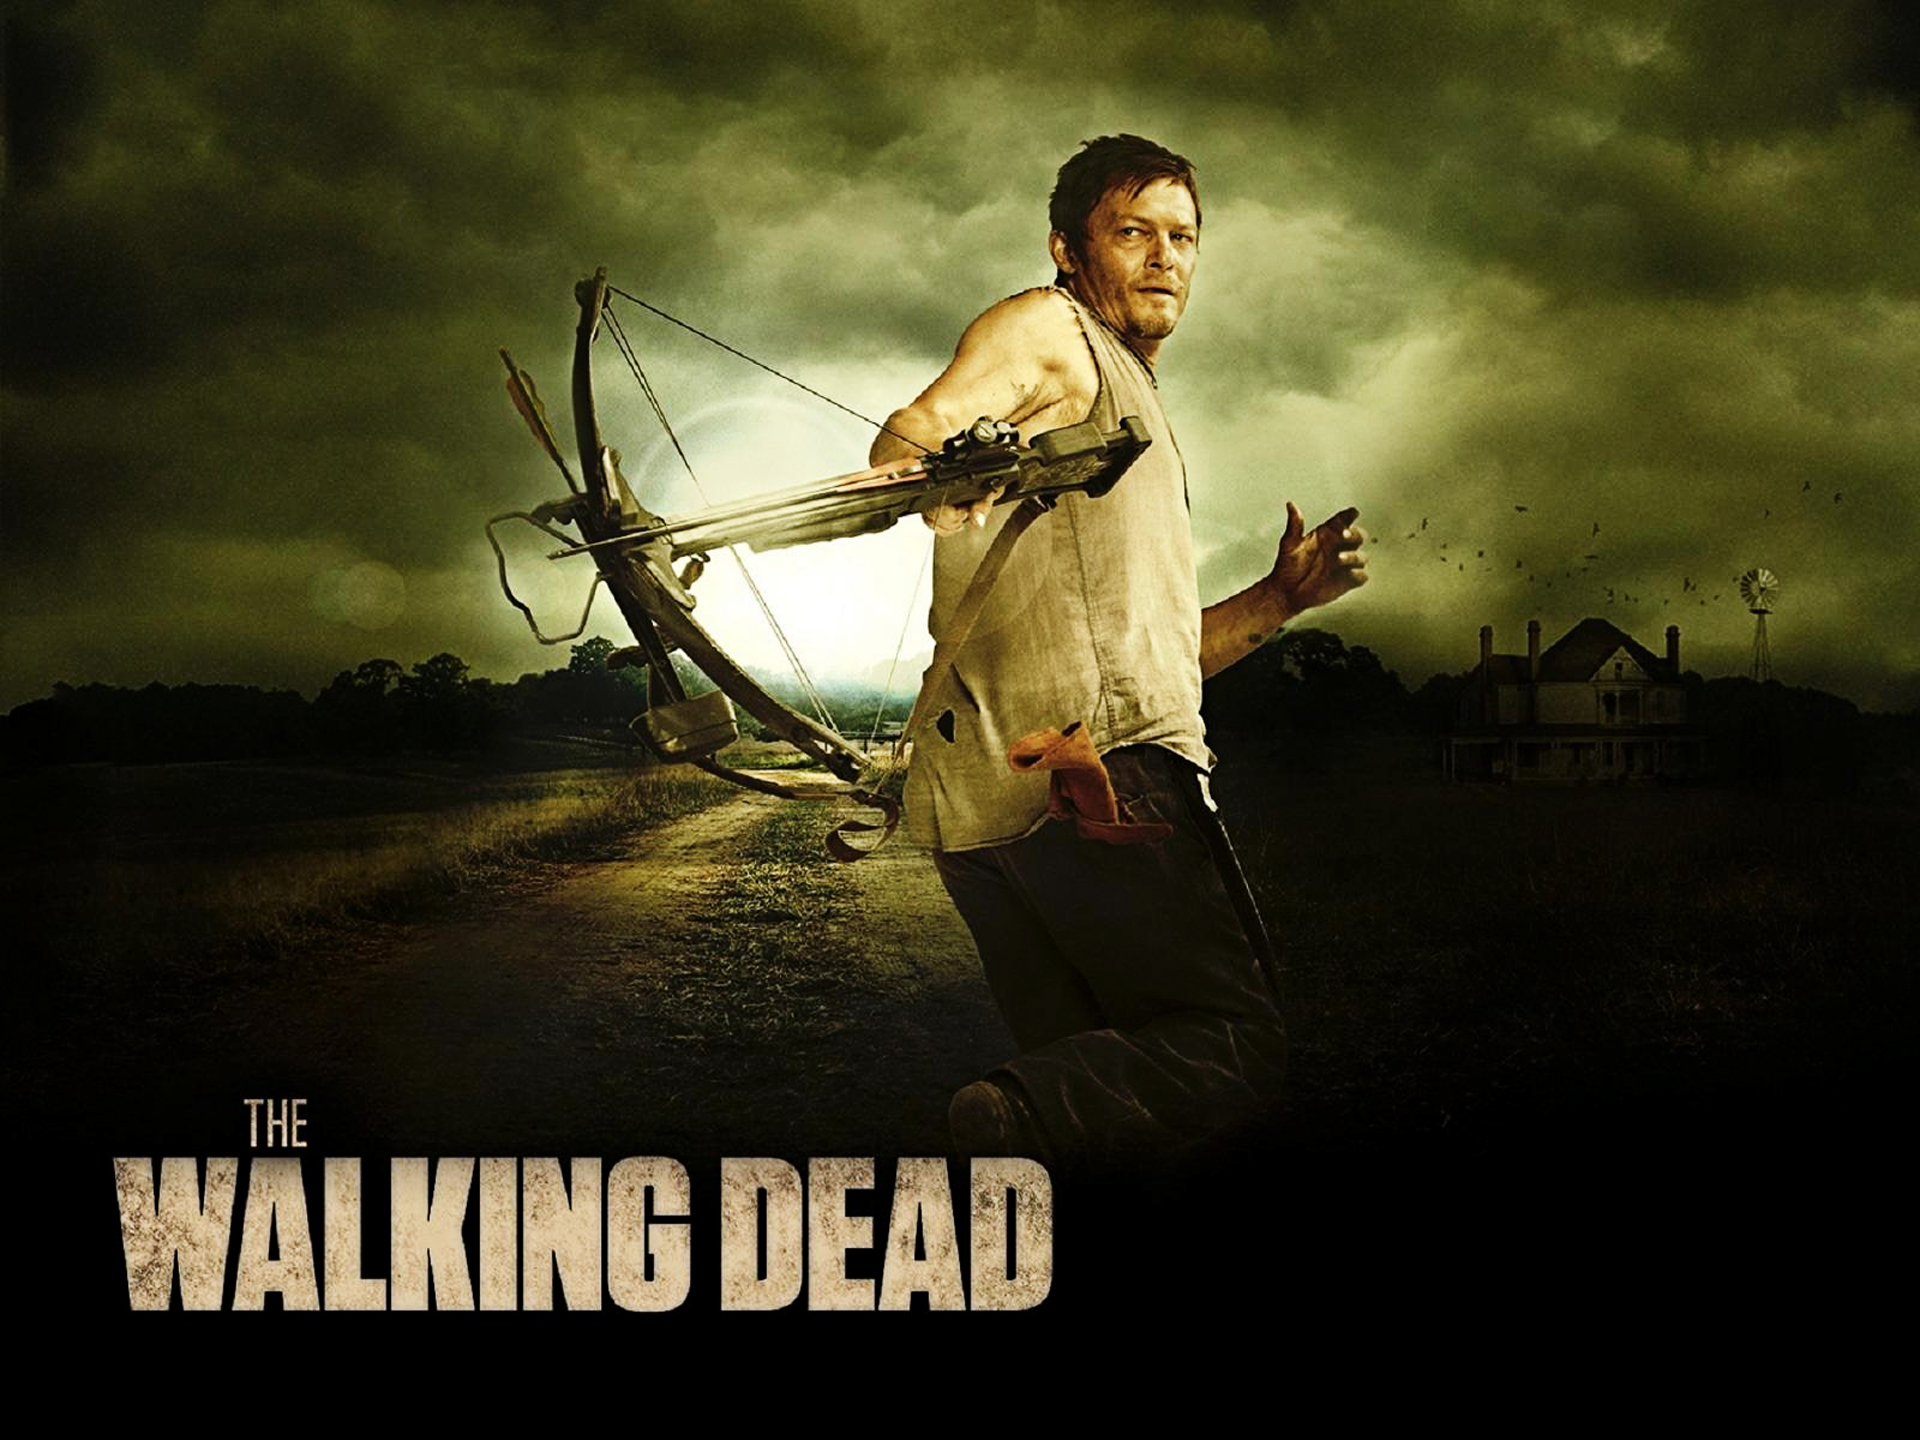 the walking dead daryl wallpaper,poster,movie,photography,photo caption,digital compositing